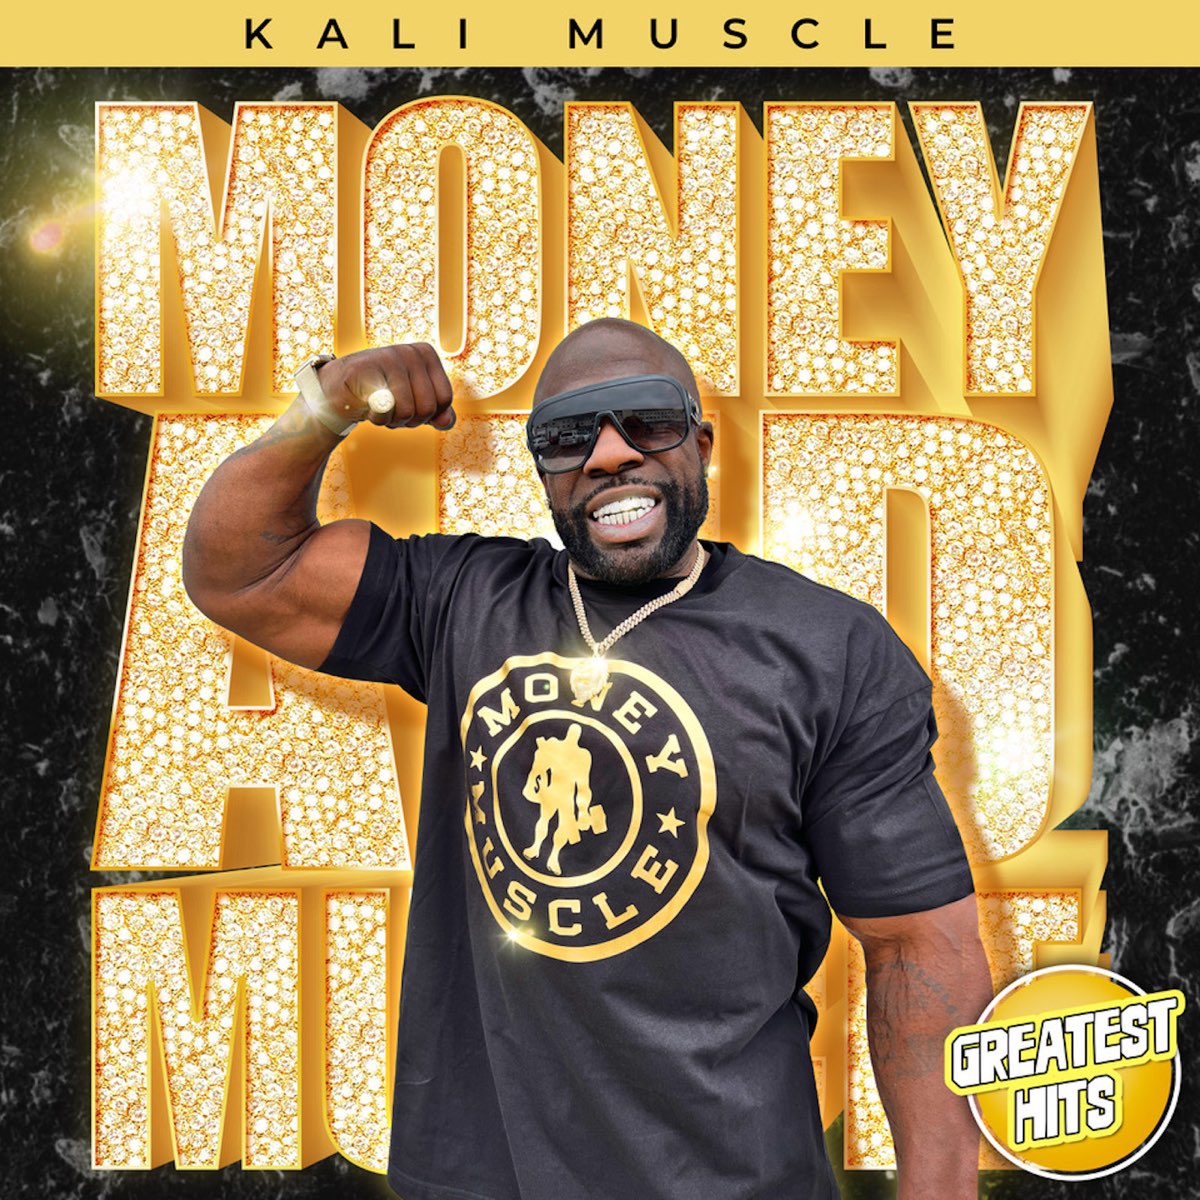 Money & Muscle (Greatest Hits) by Kali Muscle.